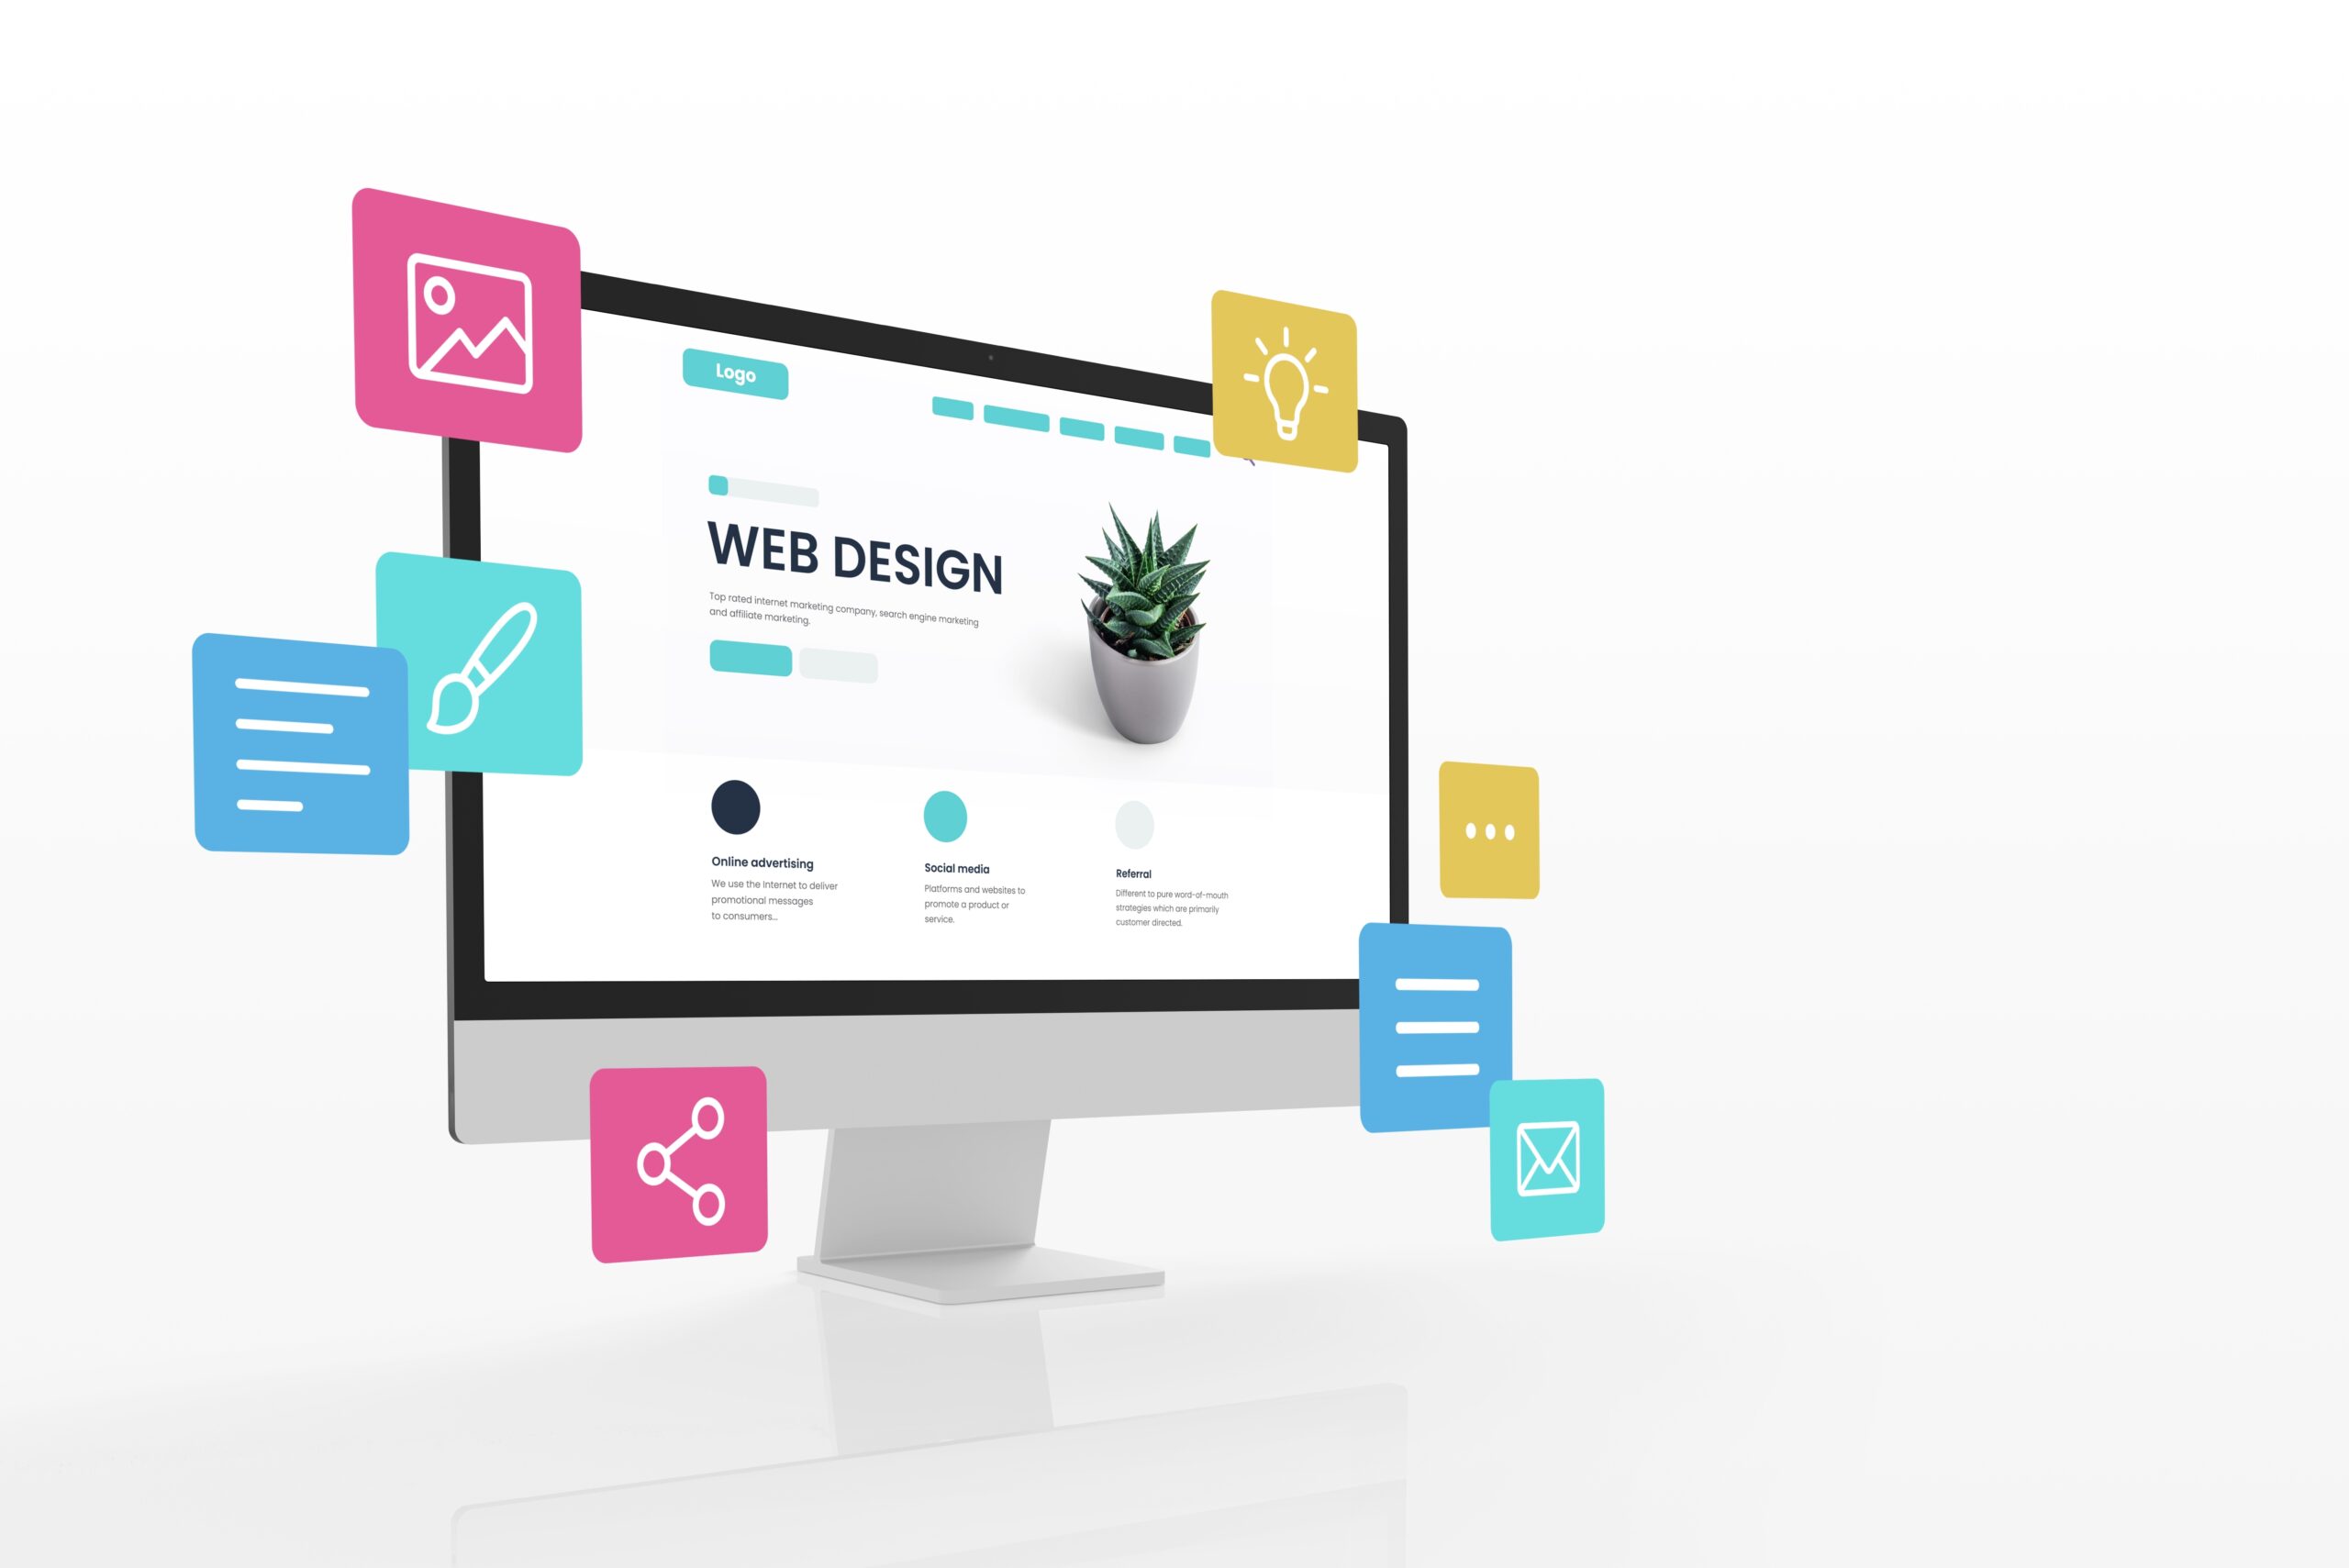 A correct website design can lead to concrete results.